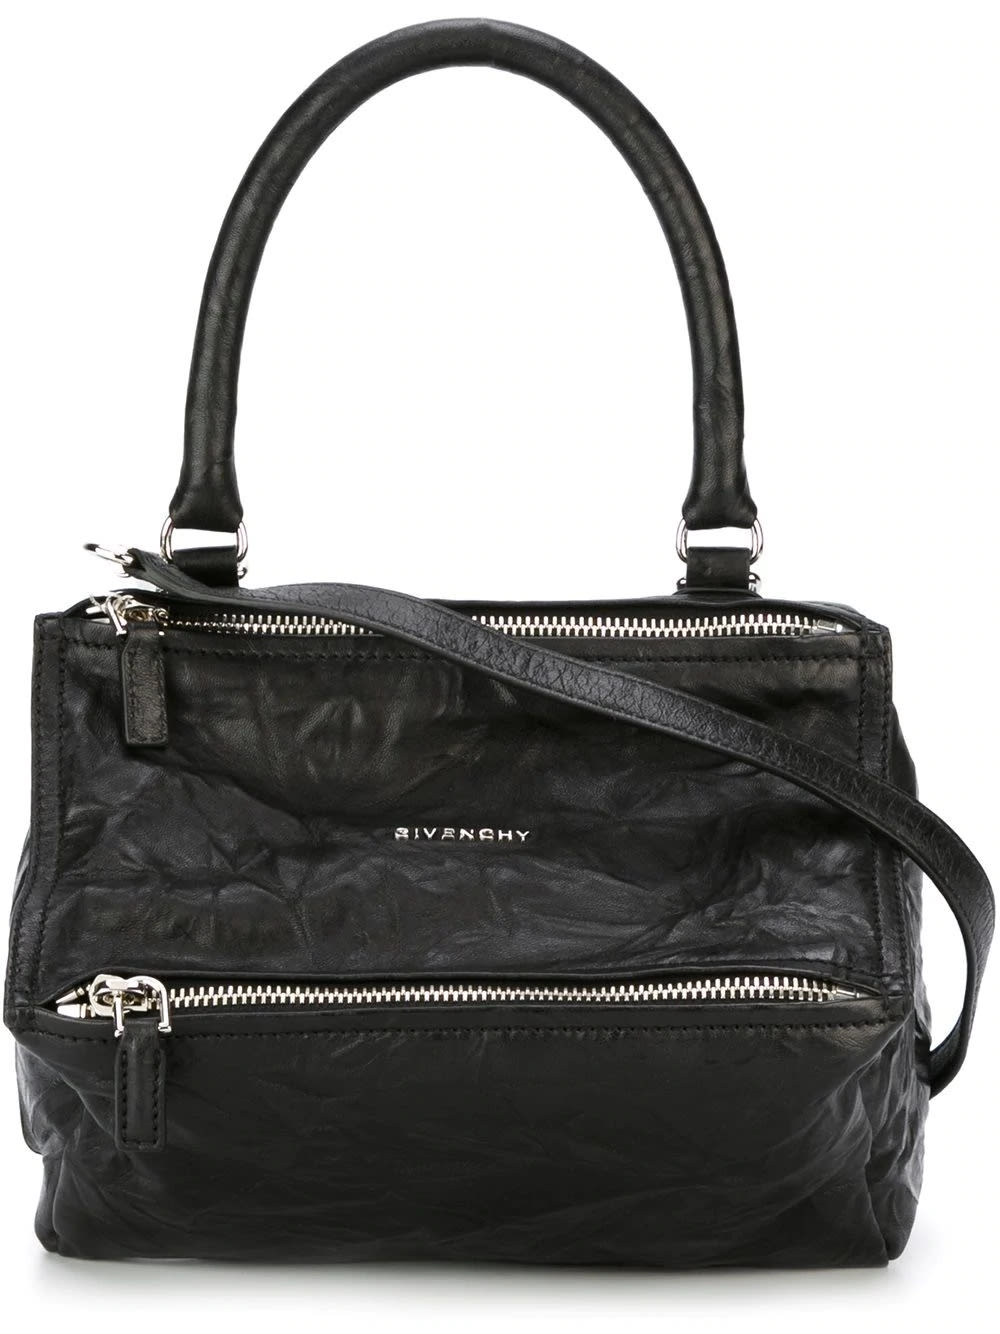 Givenchy Small Pandora Bag In Aged Black Leather